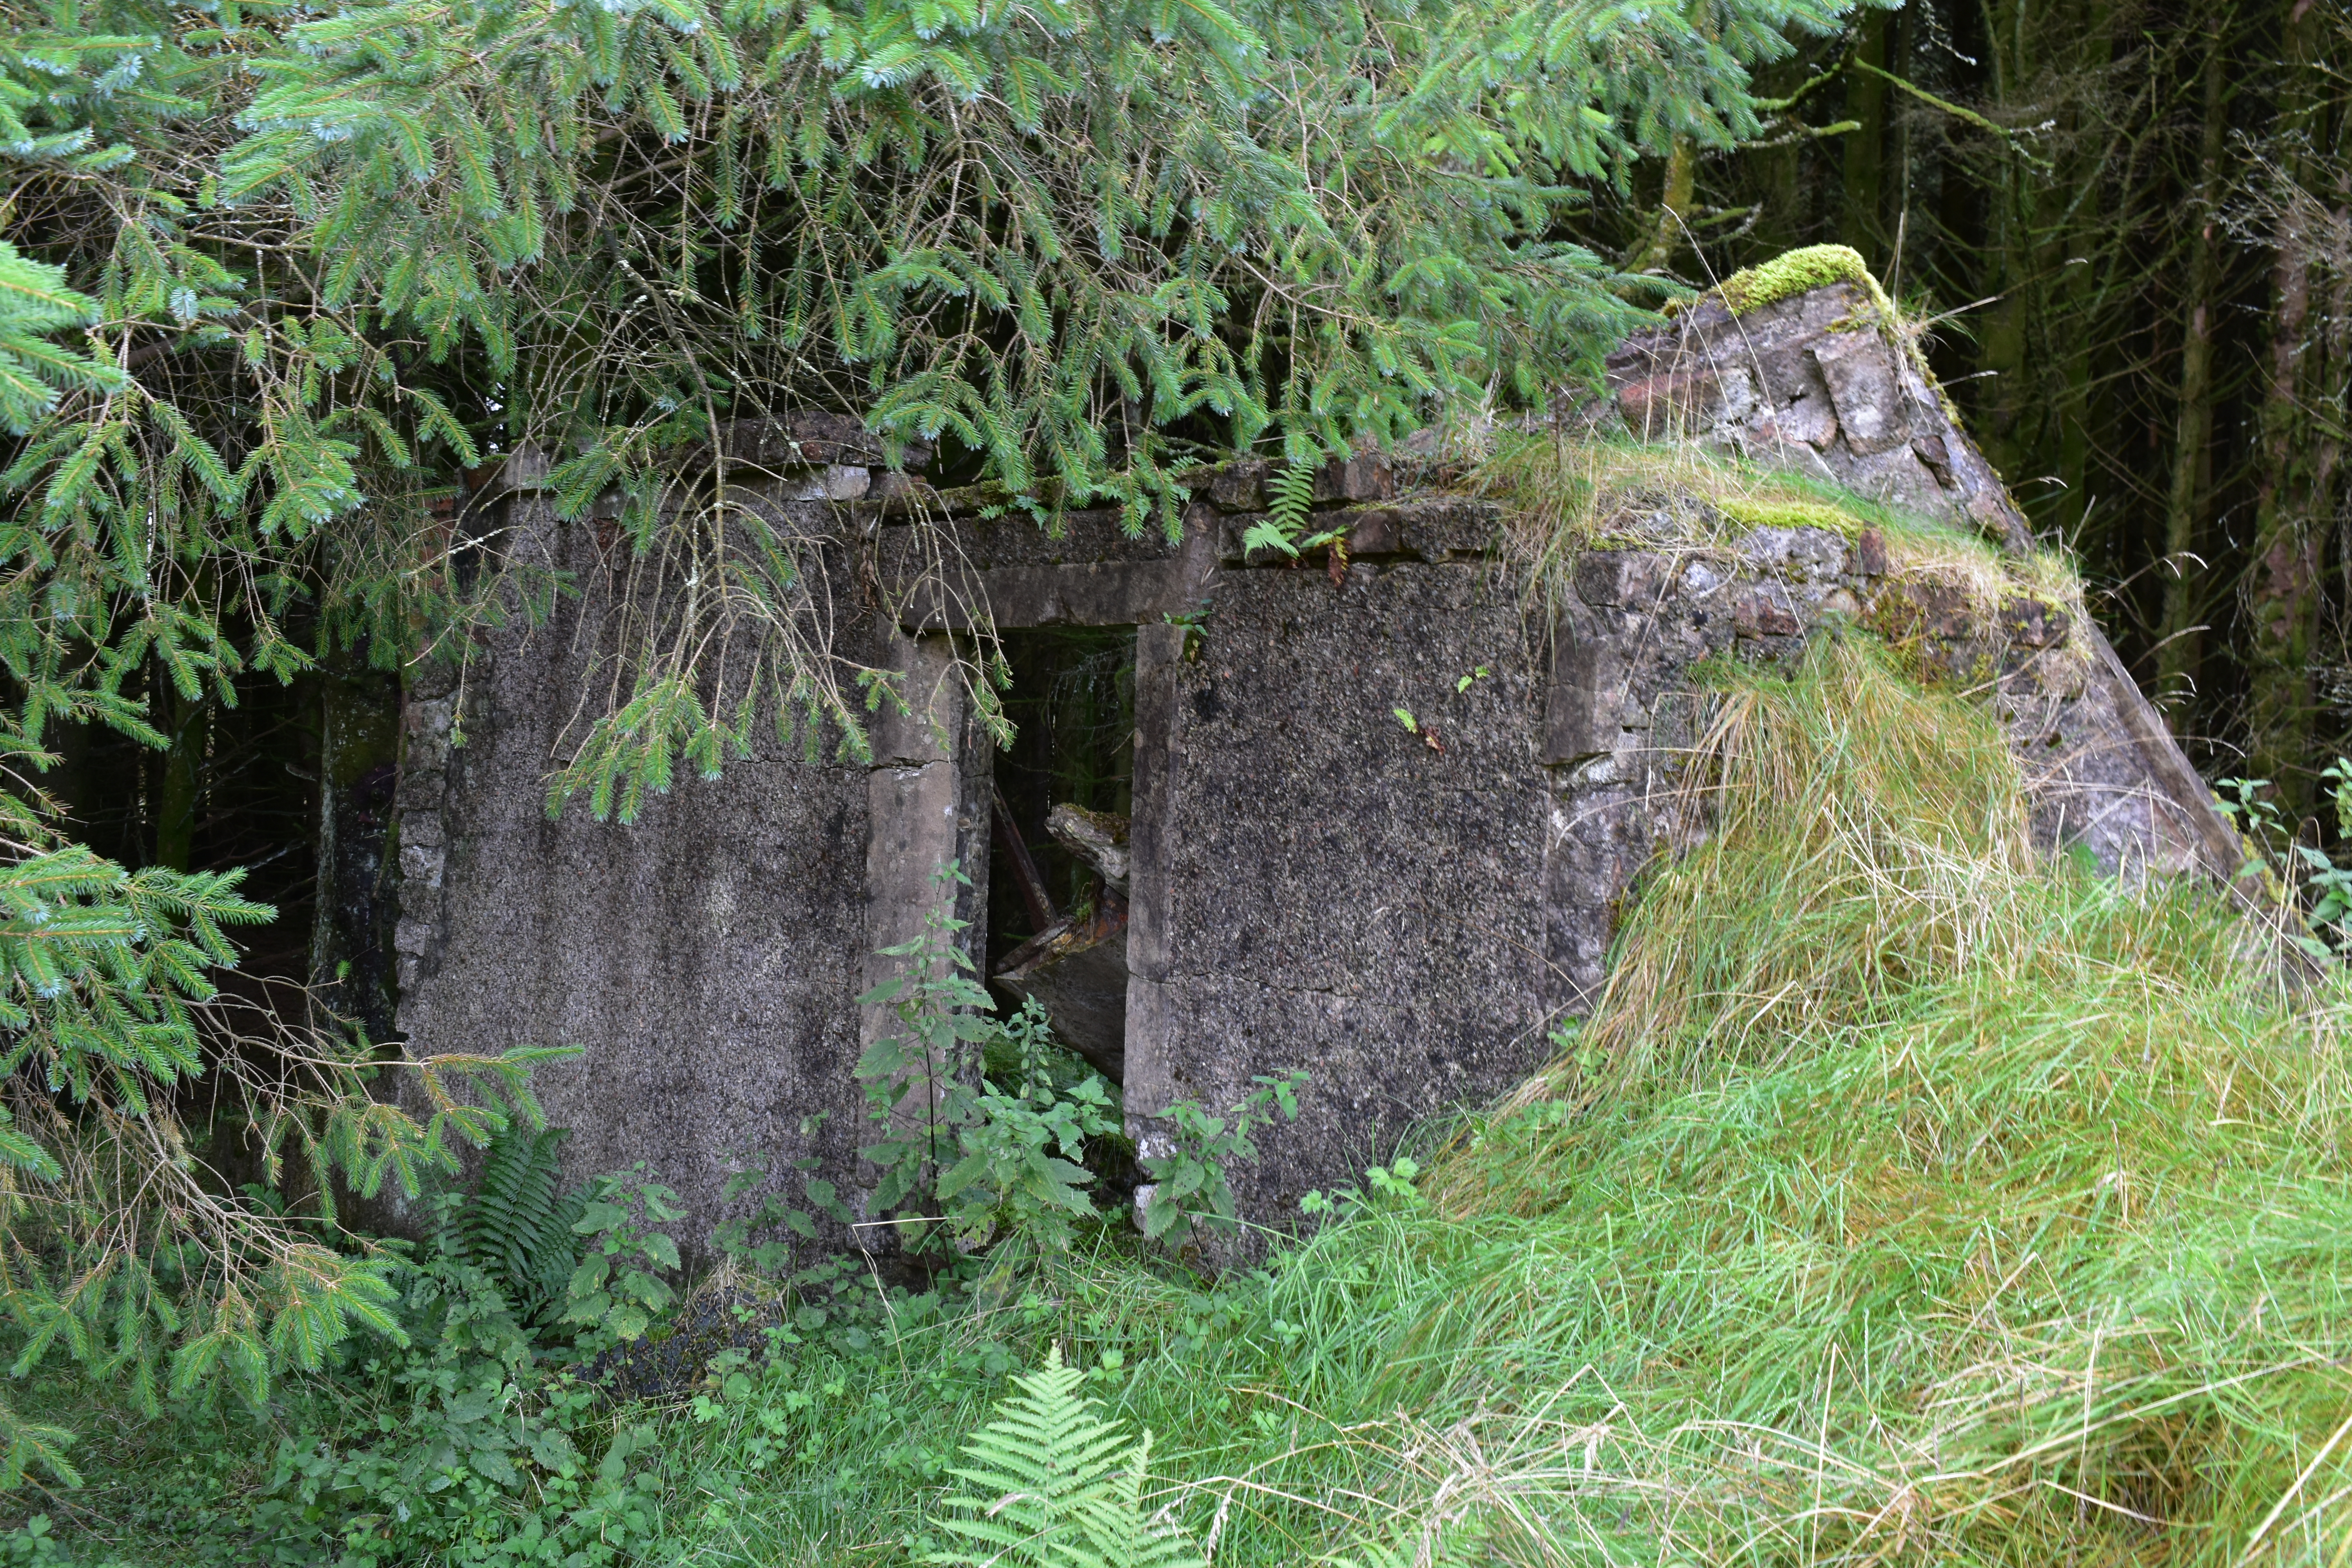 Ruined building with one roughcast wall standing with a doorway.